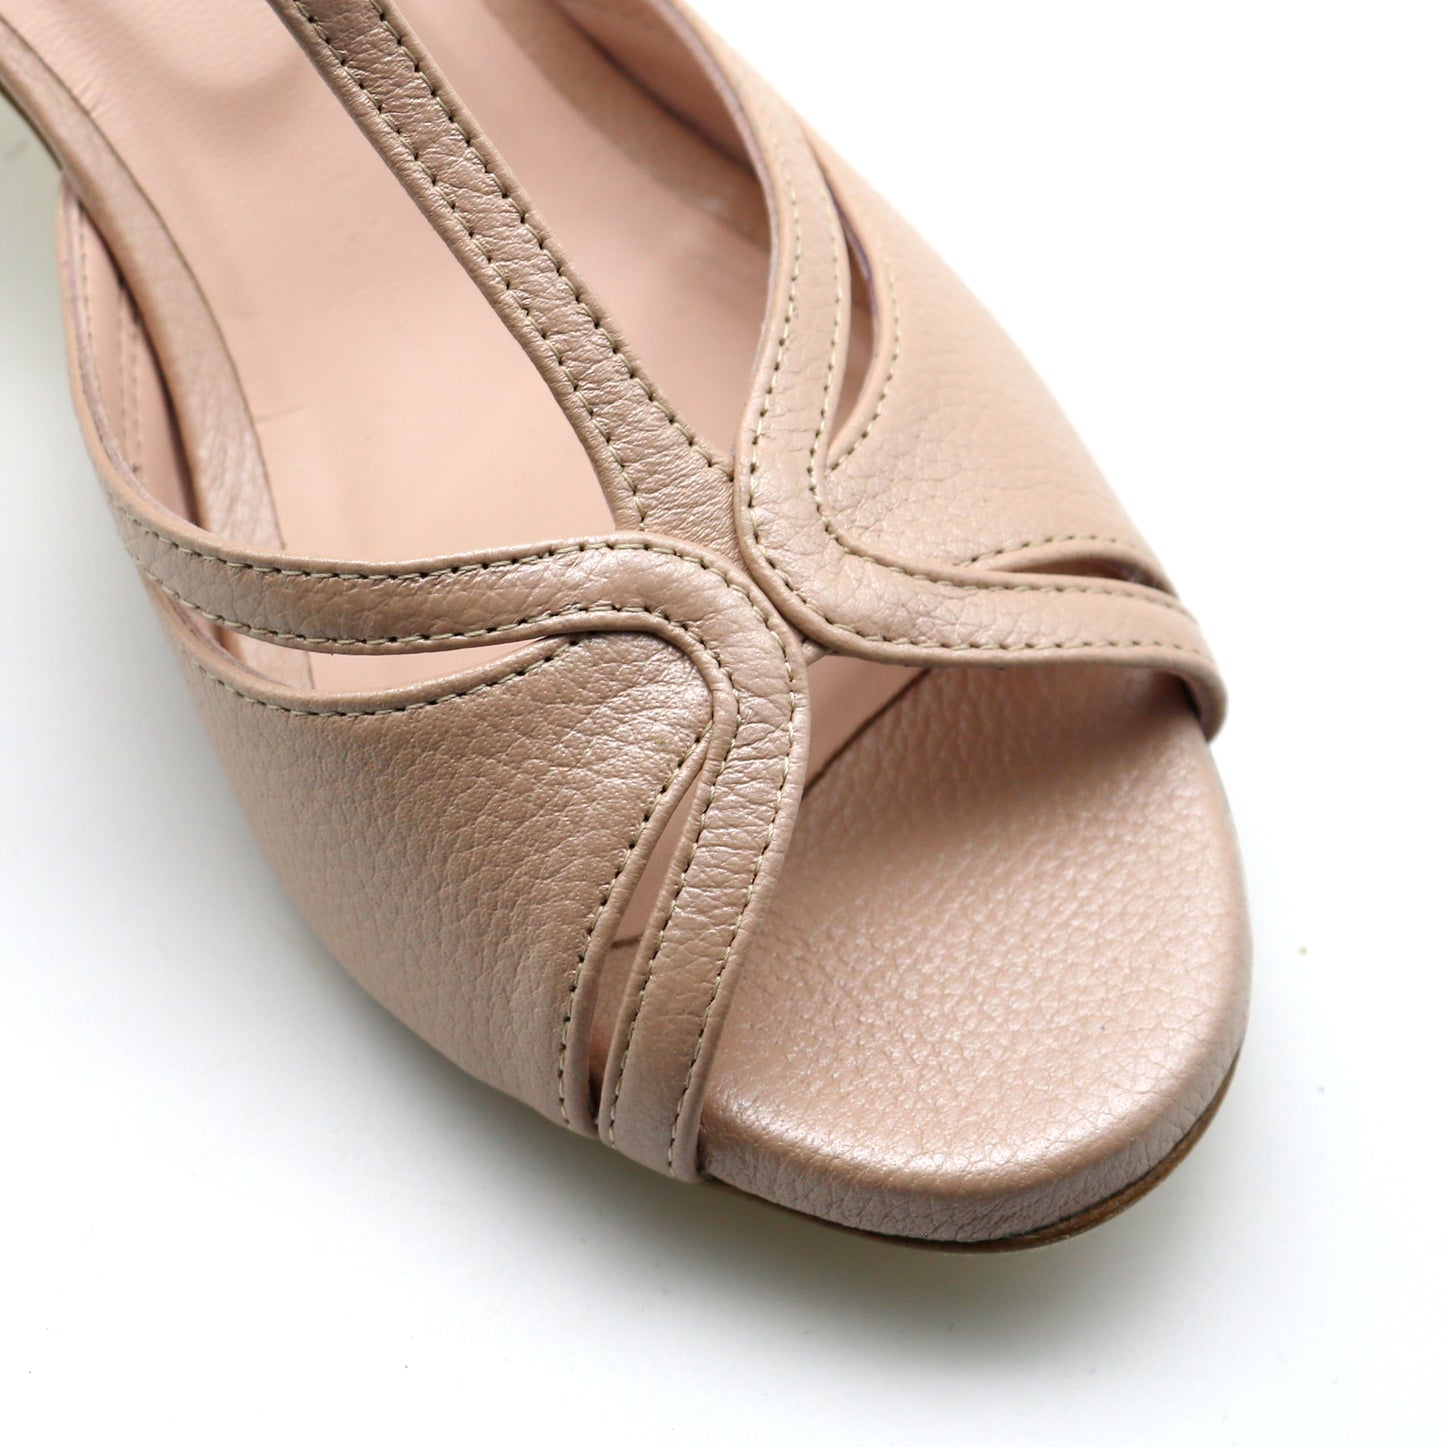 Coco nude pearly heels 6cm